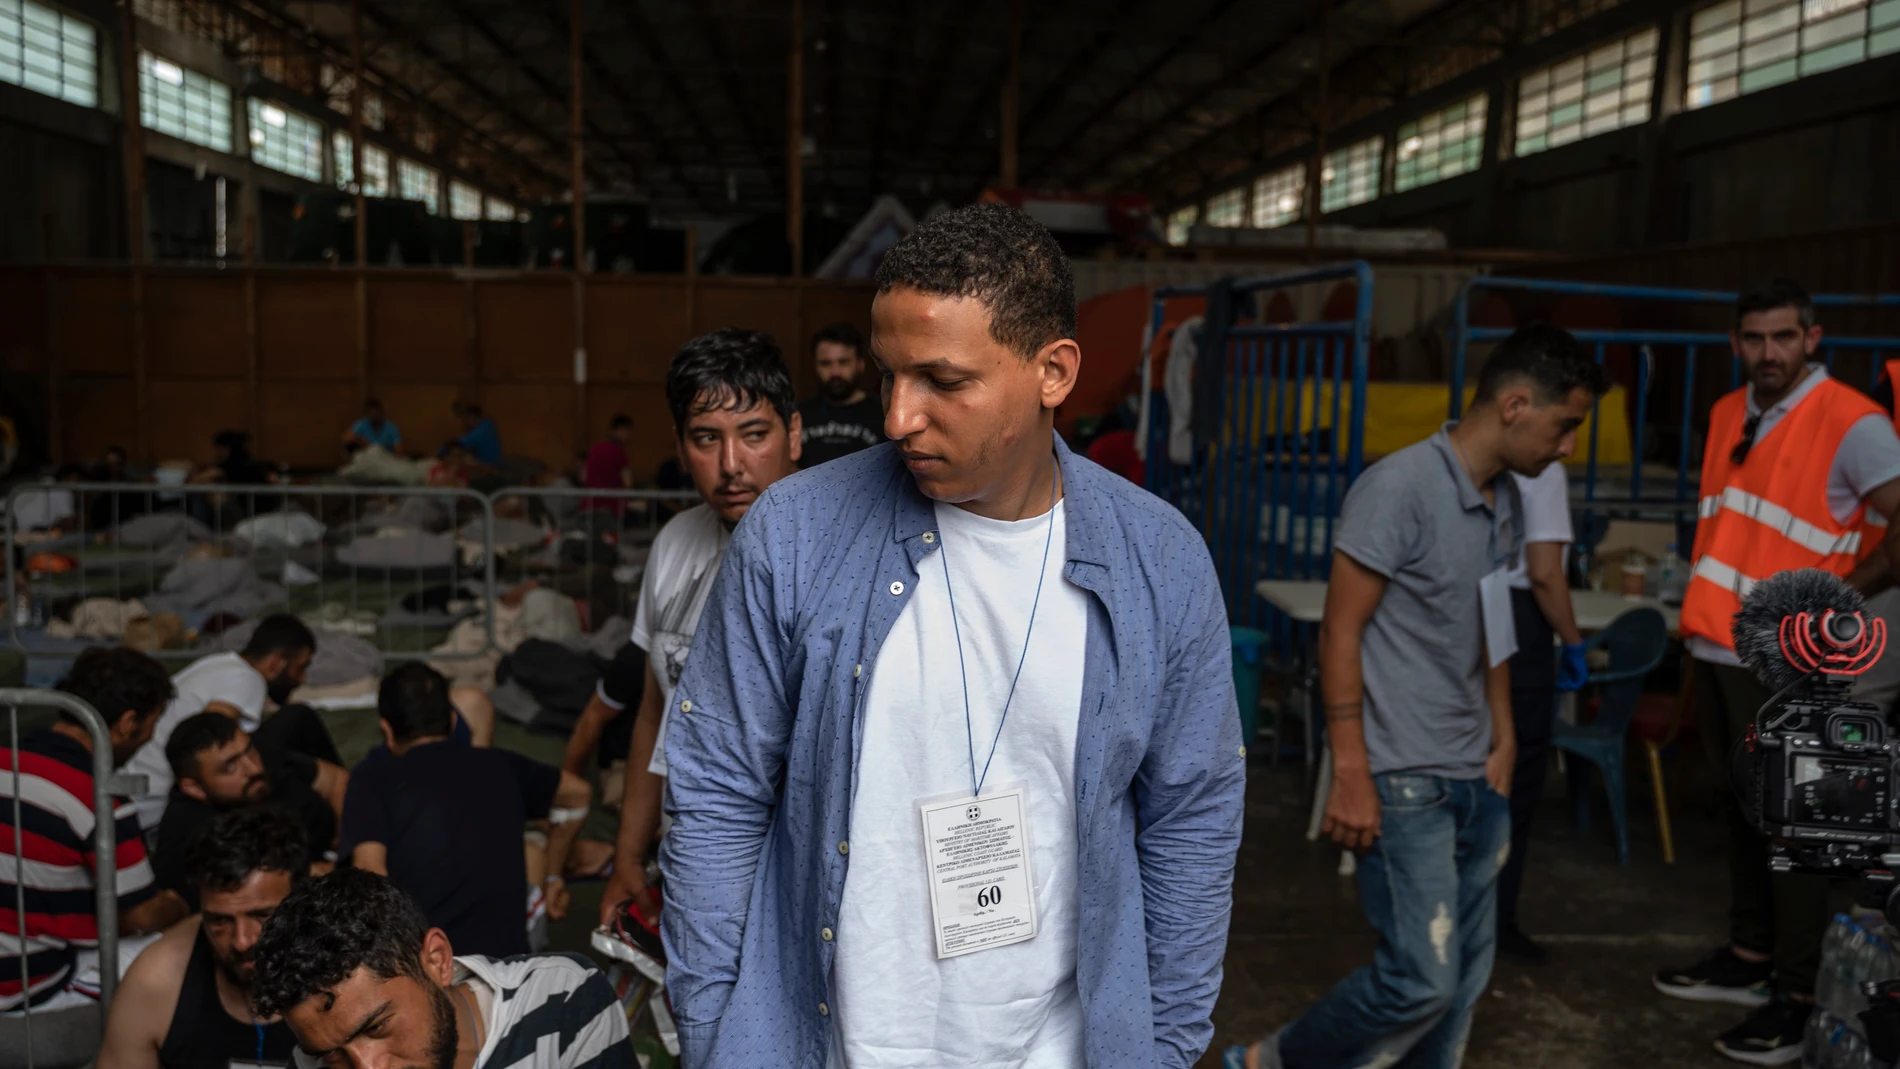 Survivors of a shipwreck are seen inside a warehouse where are taking shelter at the port in Kalamata town, about 240 kilometers (150miles) southwest of Athens, on Thursday, June 15, 2023. A fishing boat crammed to the gunwales with migrants trying to reach Europe capsized and sank Wednesday June 14 off the coast of Greece, authorities said, leaving at least 79 dead and many more missing in one of the worst disasters of its kind this year. (Angelos Tzortzinis, Pool via AP)